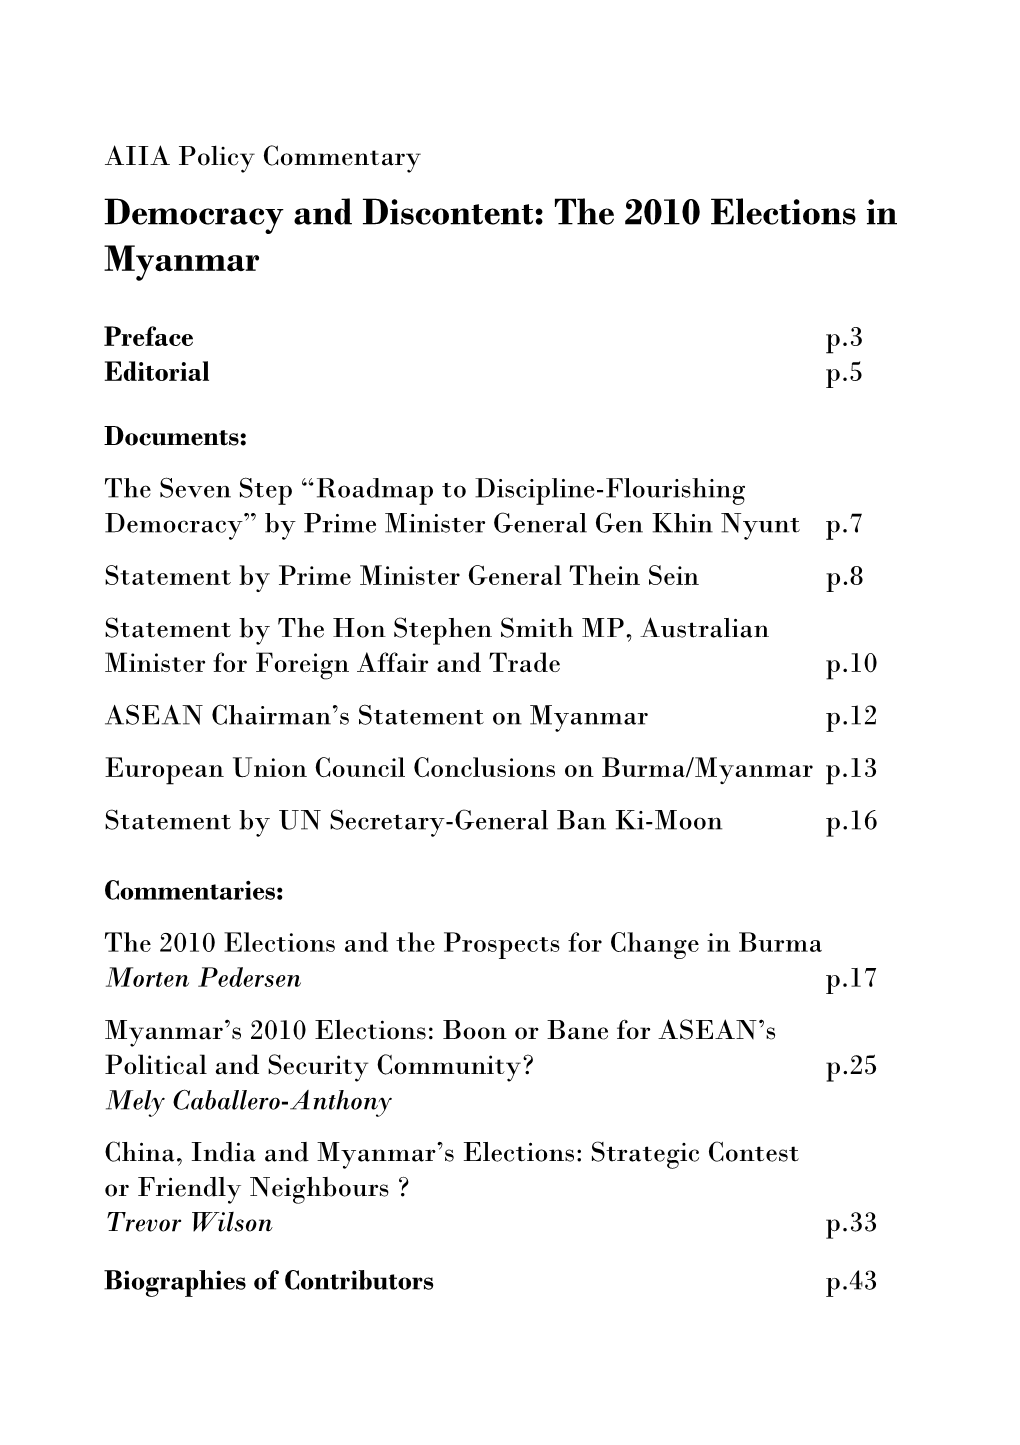 Democracy and Discontent: the 2010 Elections in Myanmar